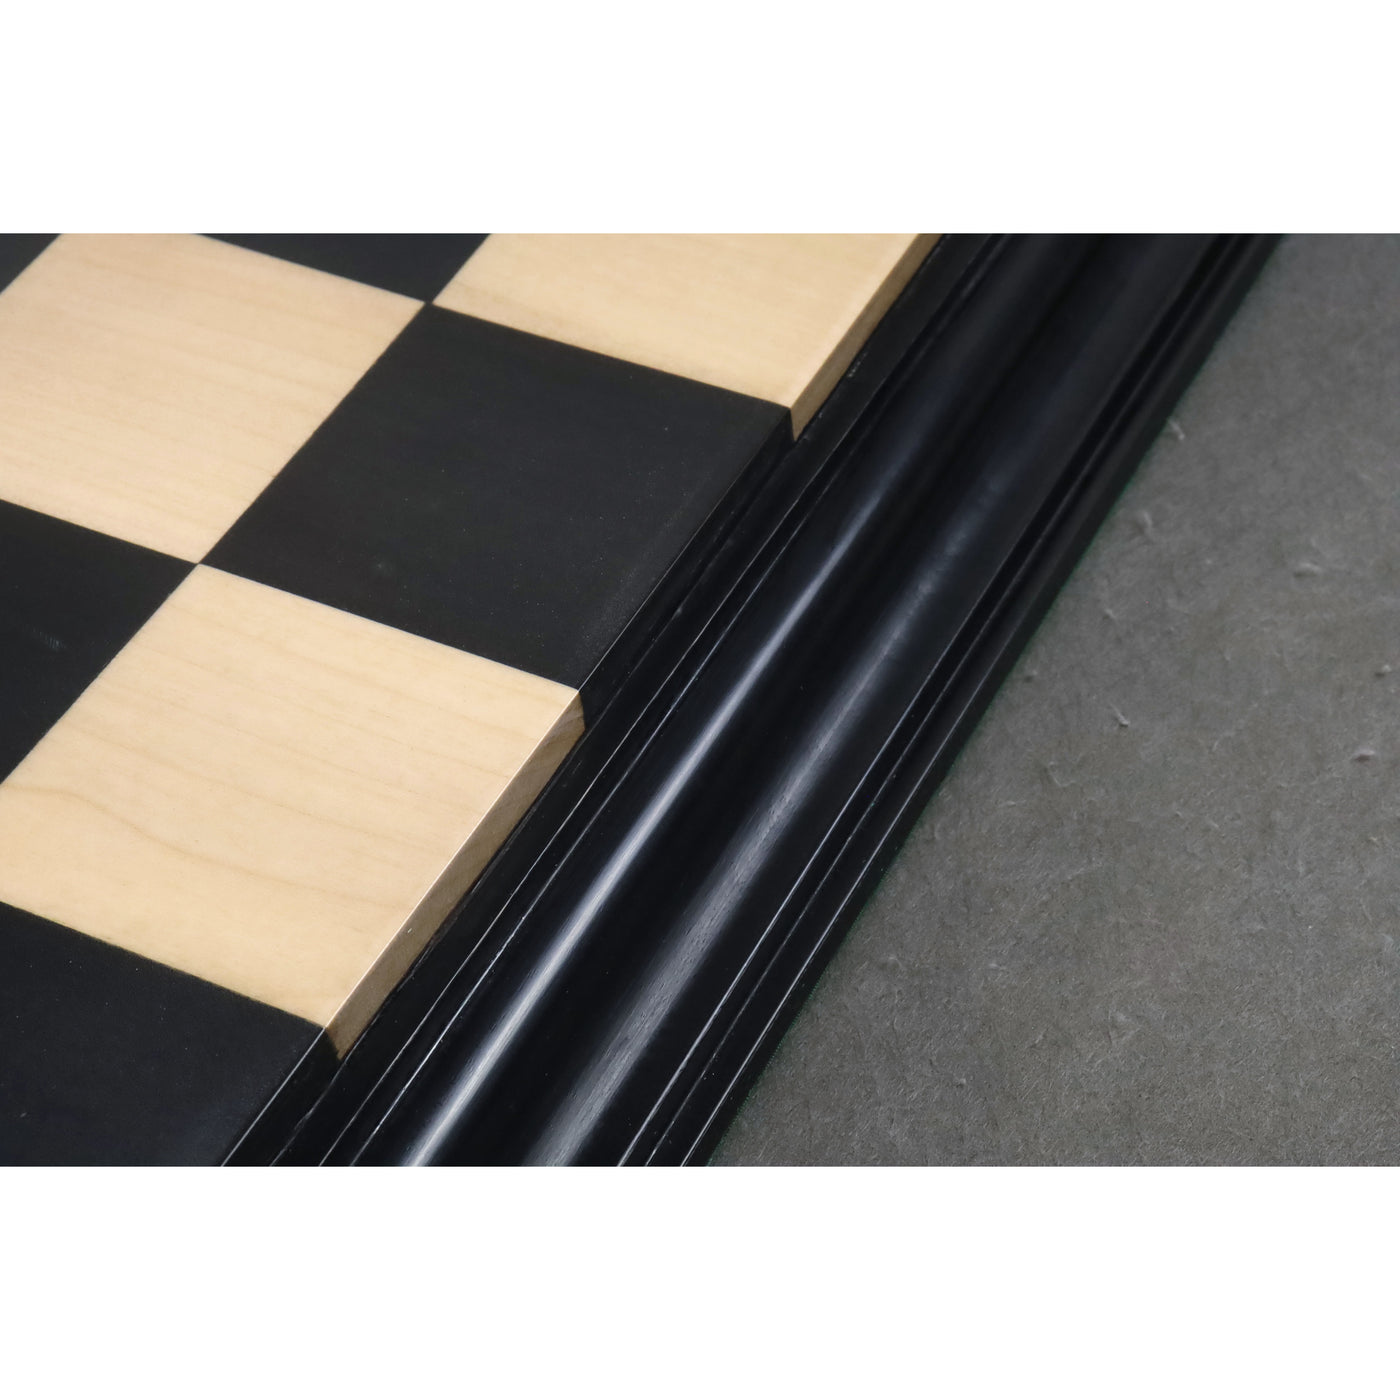 23" Ebony & Maple Wood Luxury Chess board with Carved Border- 63 mm Square